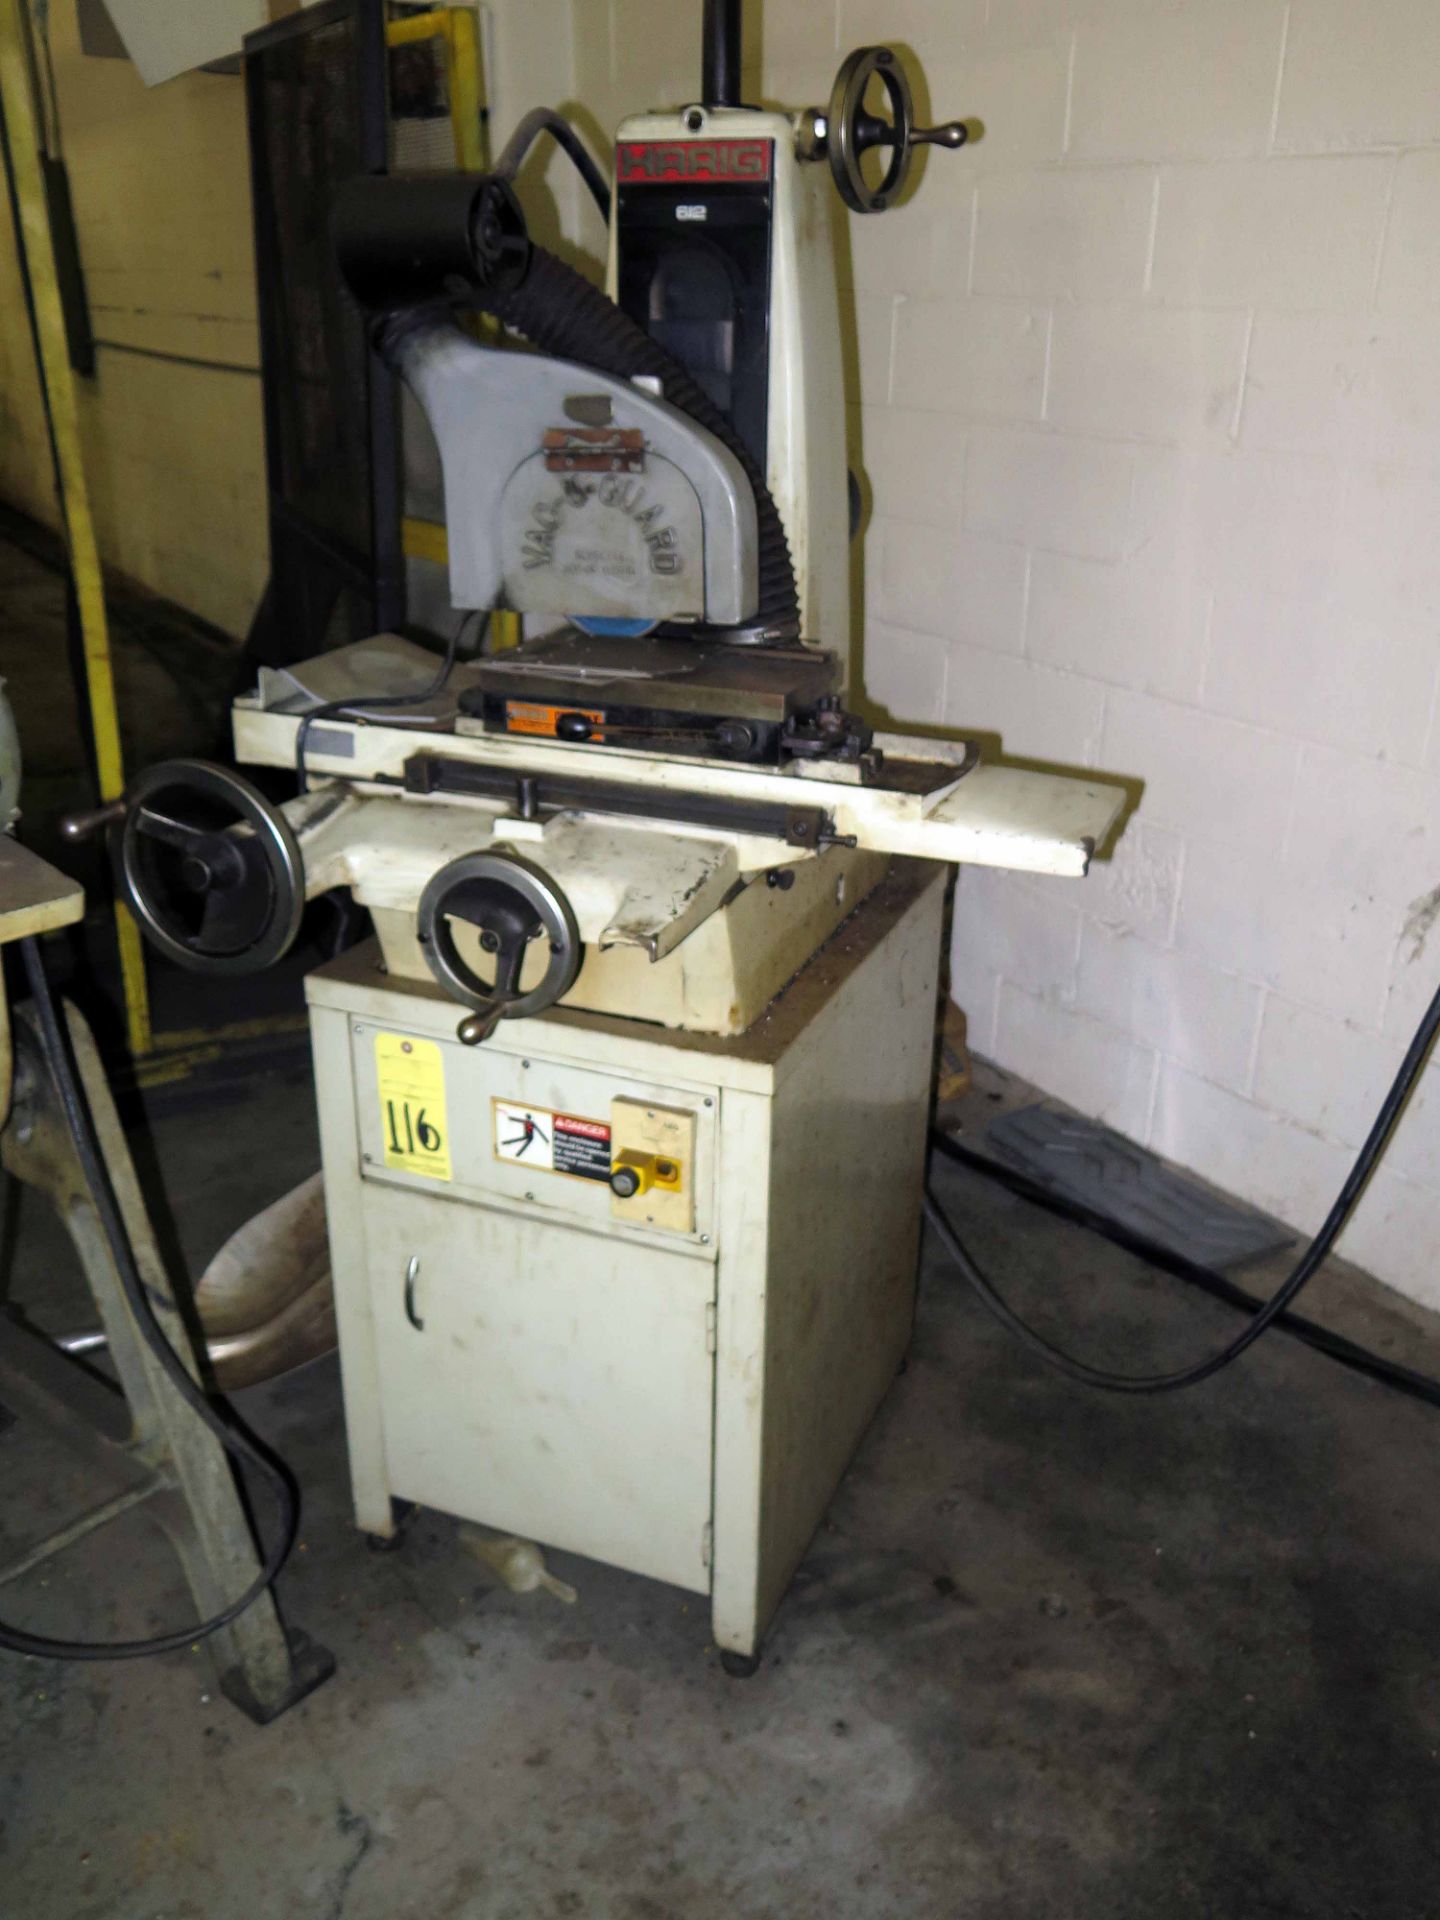 HAND FEED SURFACE GRINDER, HARIG MDL. 612, 6" x 12" perm. magnetic chuck, 6" wheel, cabinet base,